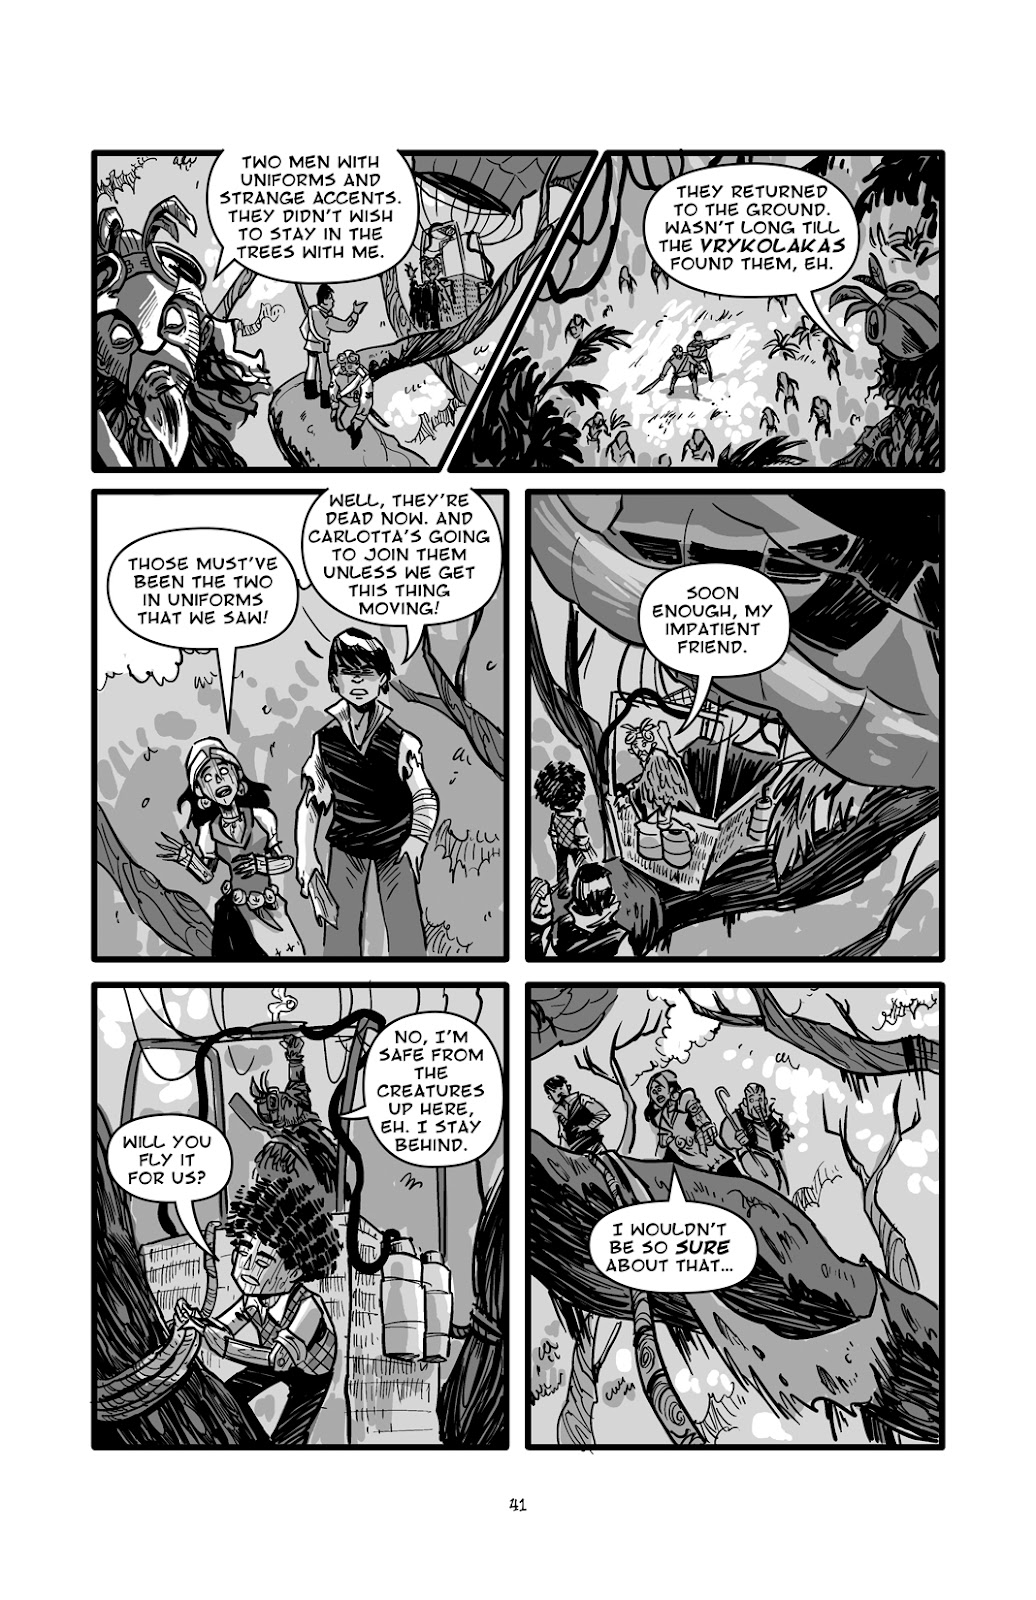 Pinocchio: Vampire Slayer - Of Wood and Blood issue 2 - Page 15